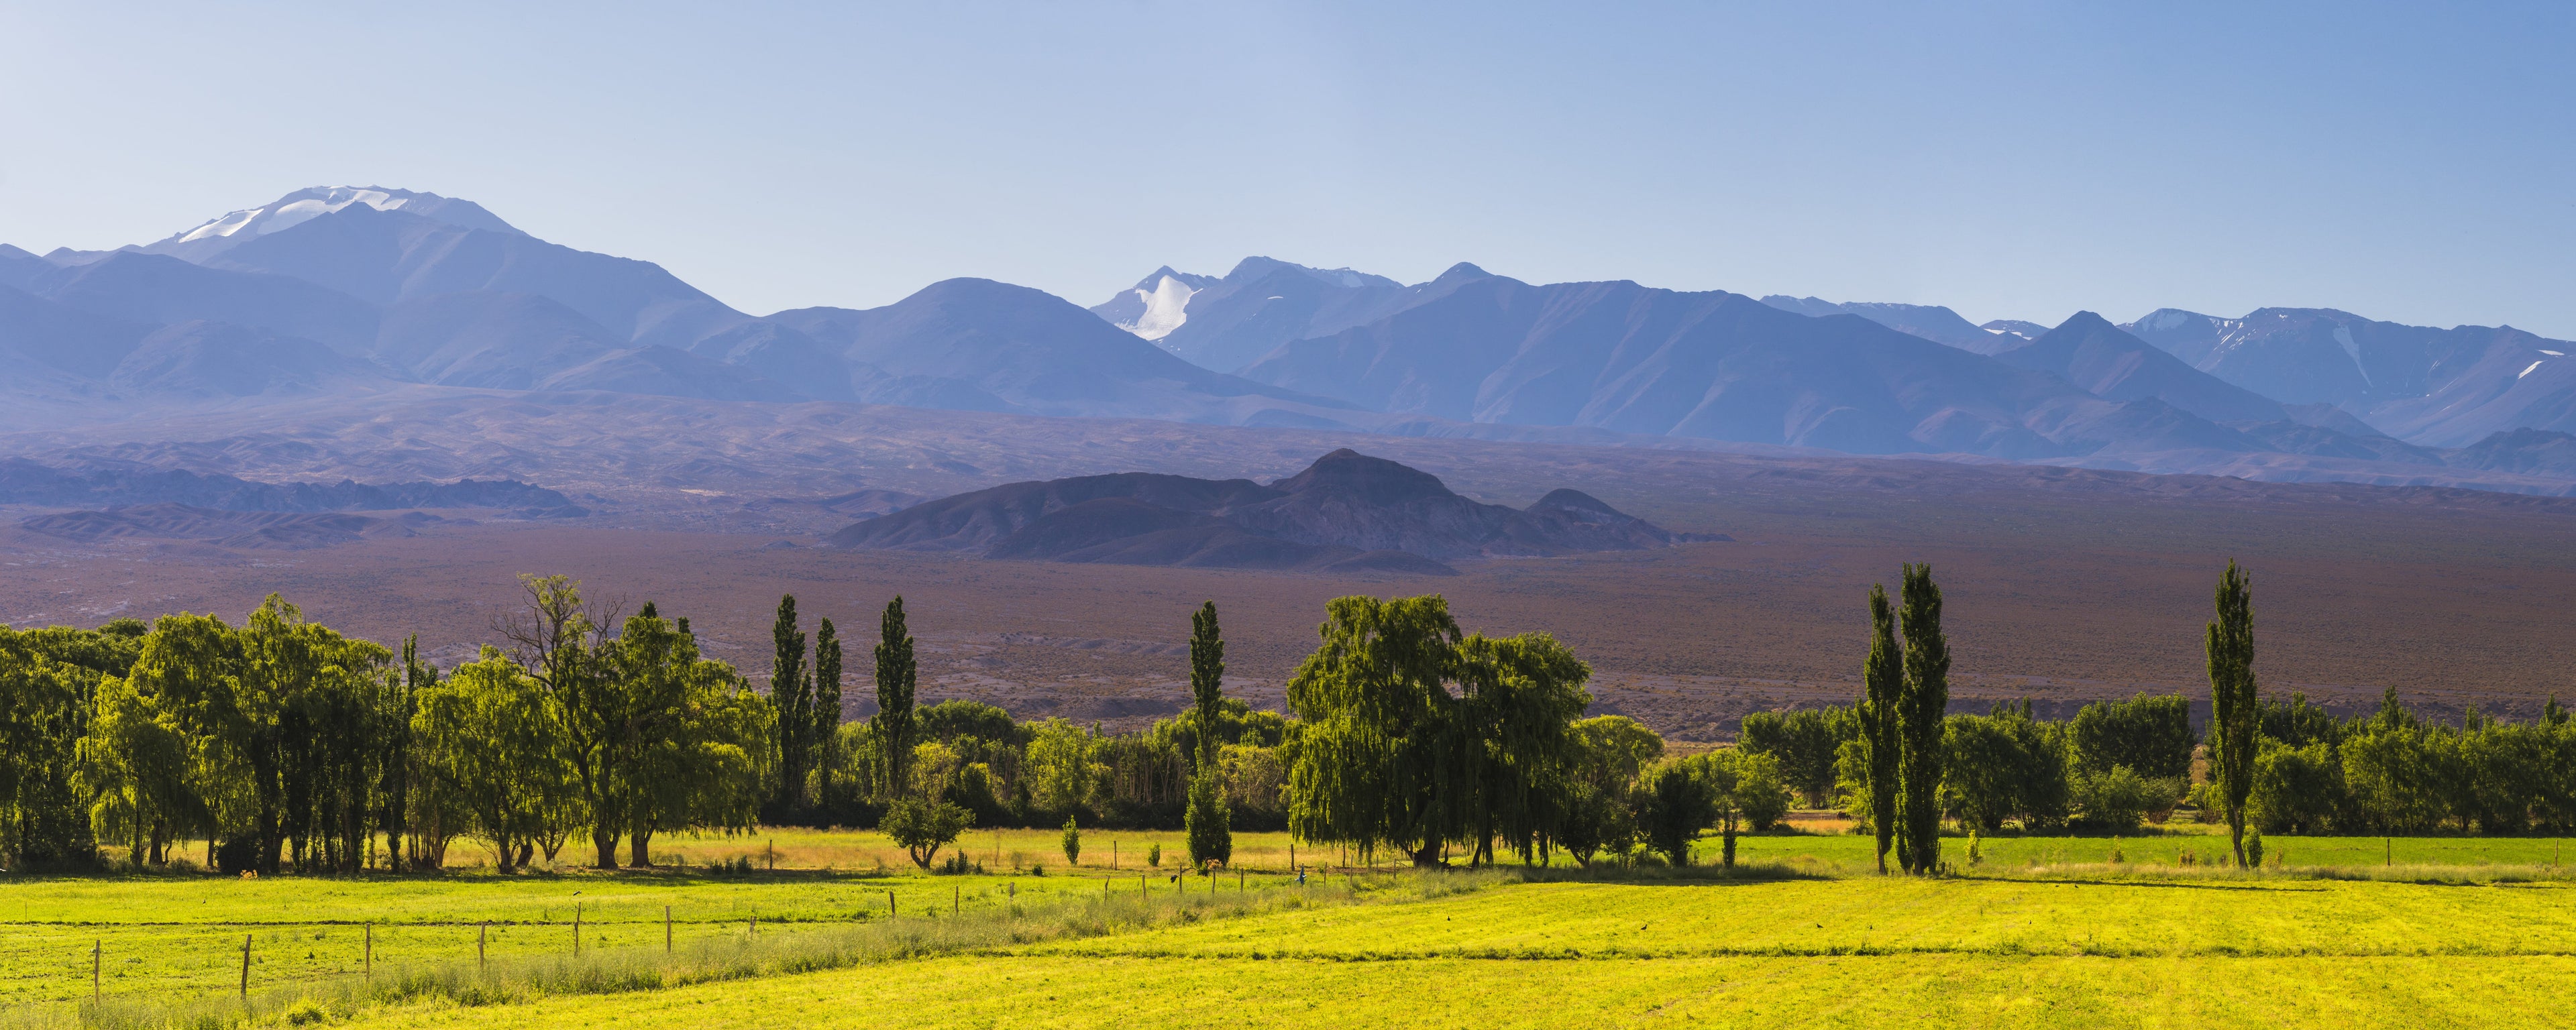 Landscape of green fields and moutains in the background. They are typical of the Cuyo region of Argentina.